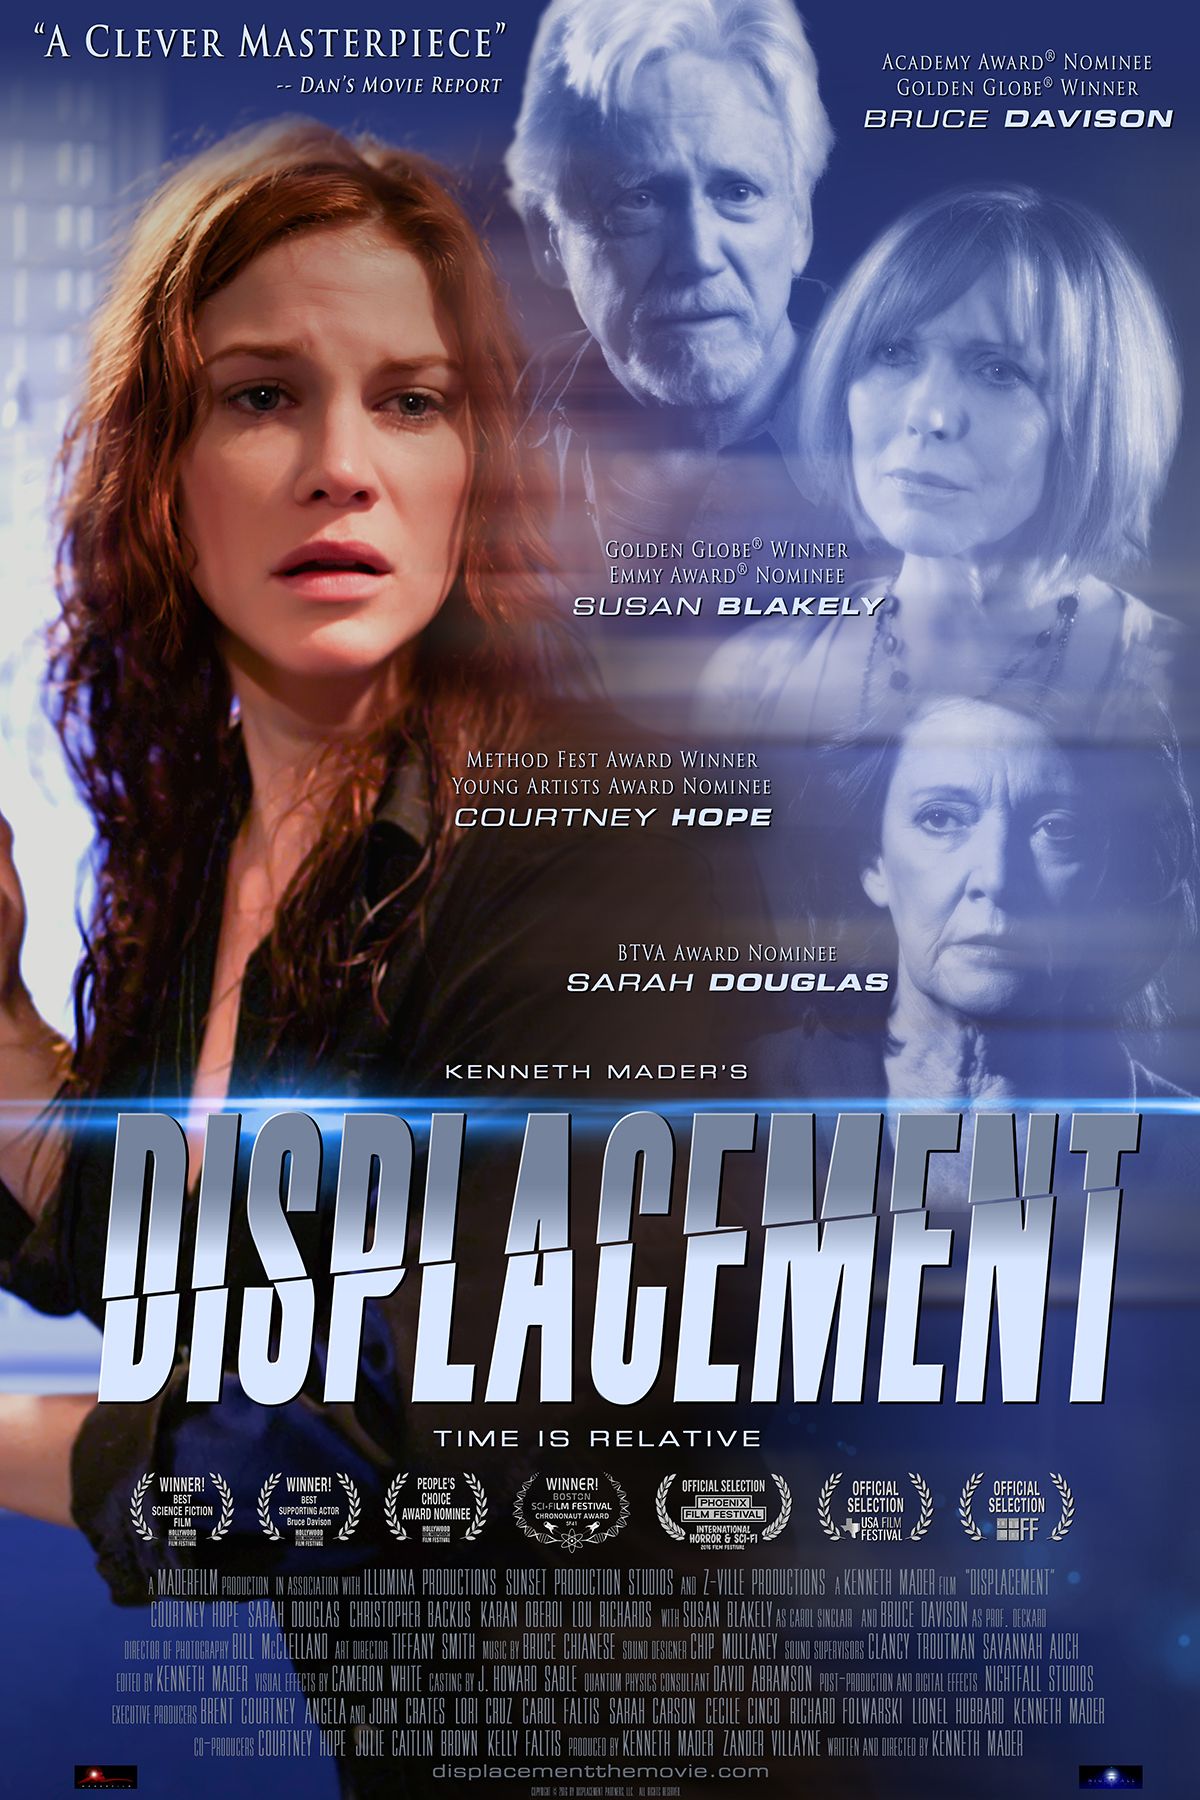 Displacement (2016) Hindi Dubbed Full Movie